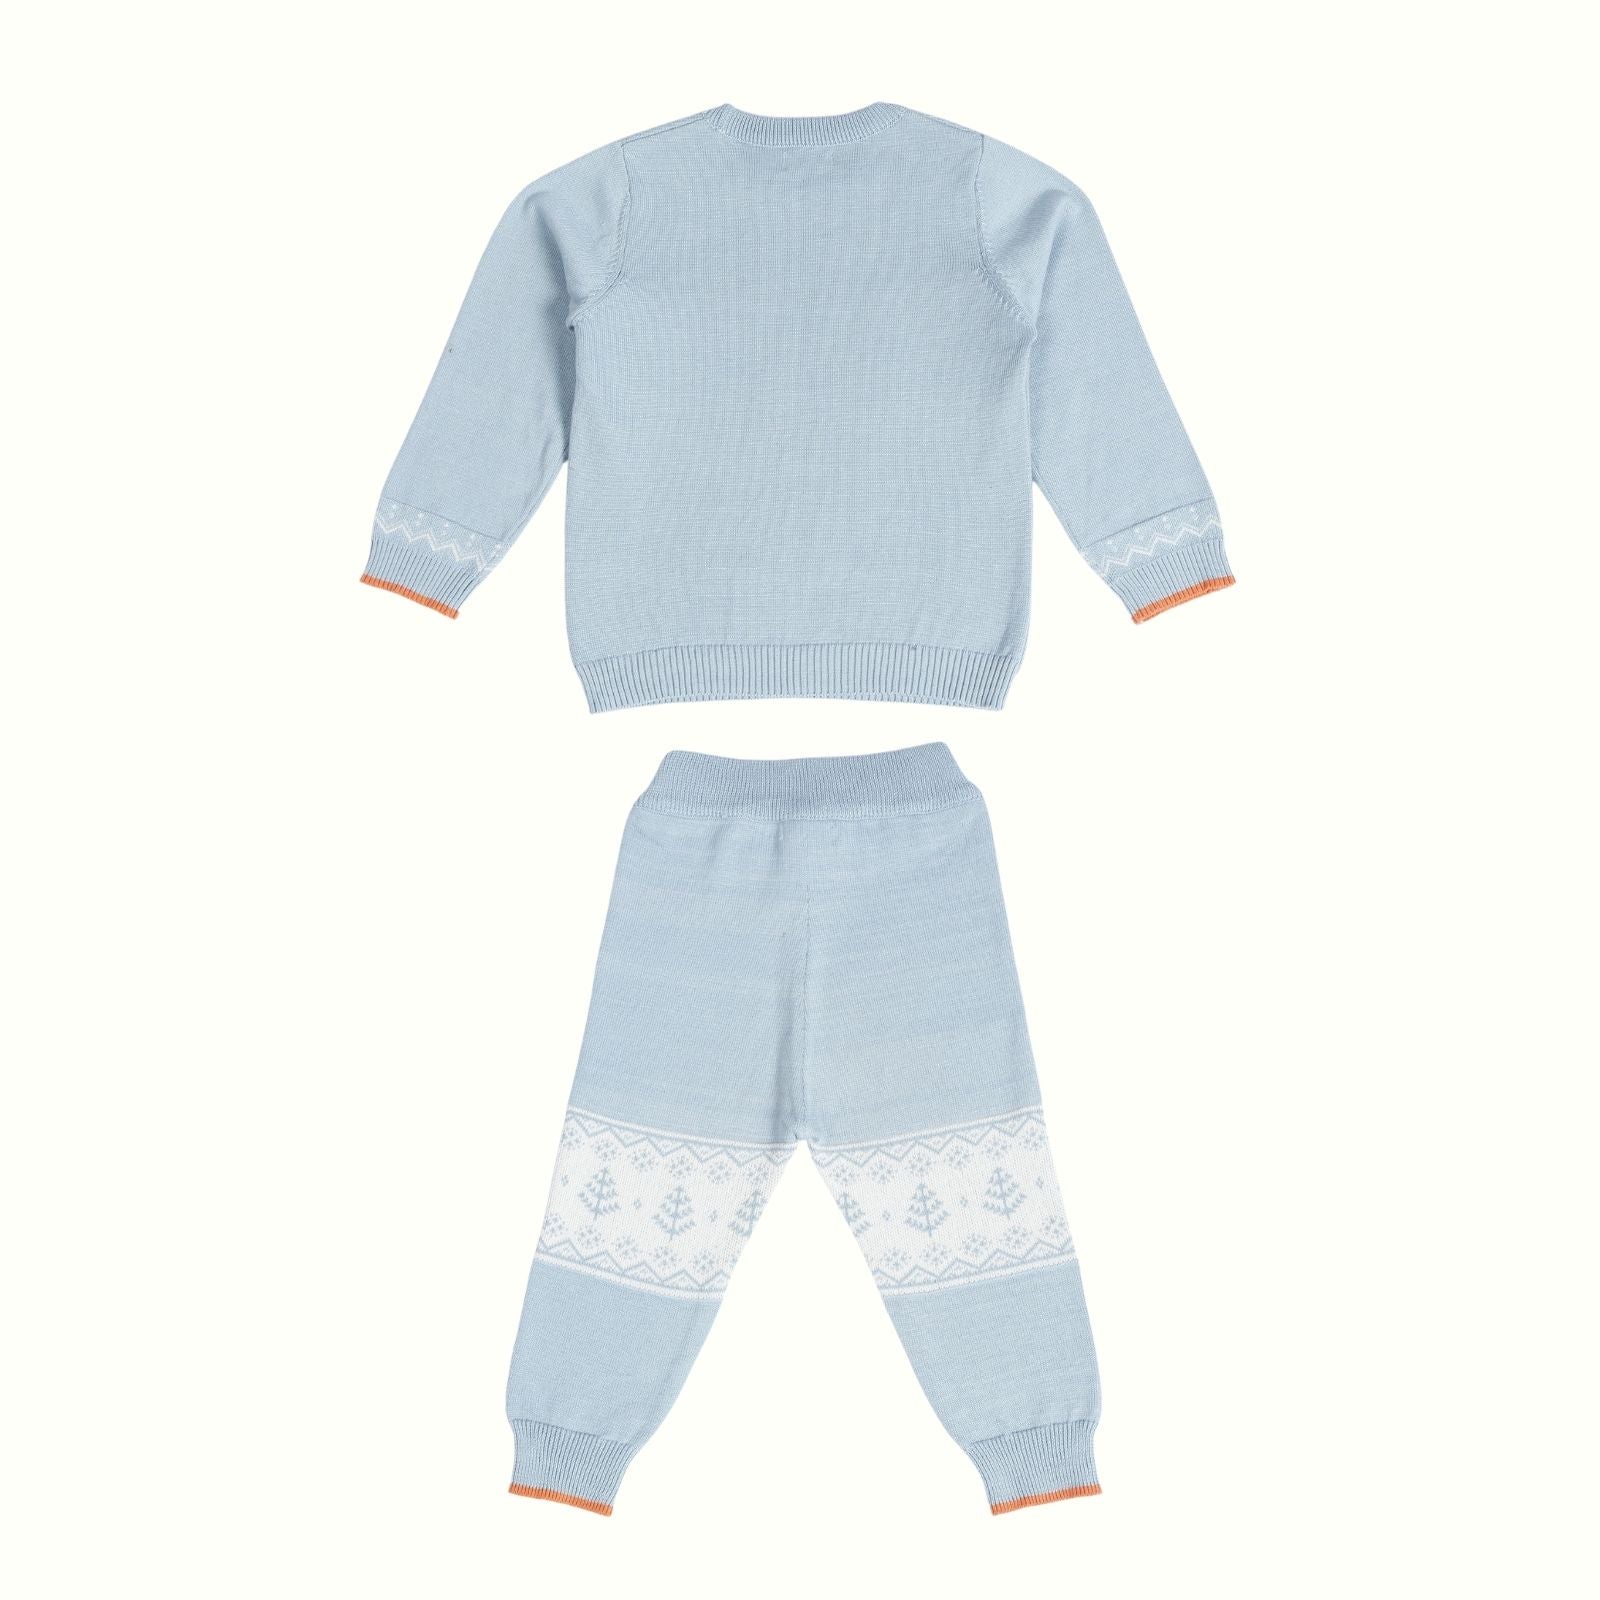 Greendeer Delighted Lion Jacquard 100% Cotton Sweater with Lower - Powder Blue & Orange - Set of 2